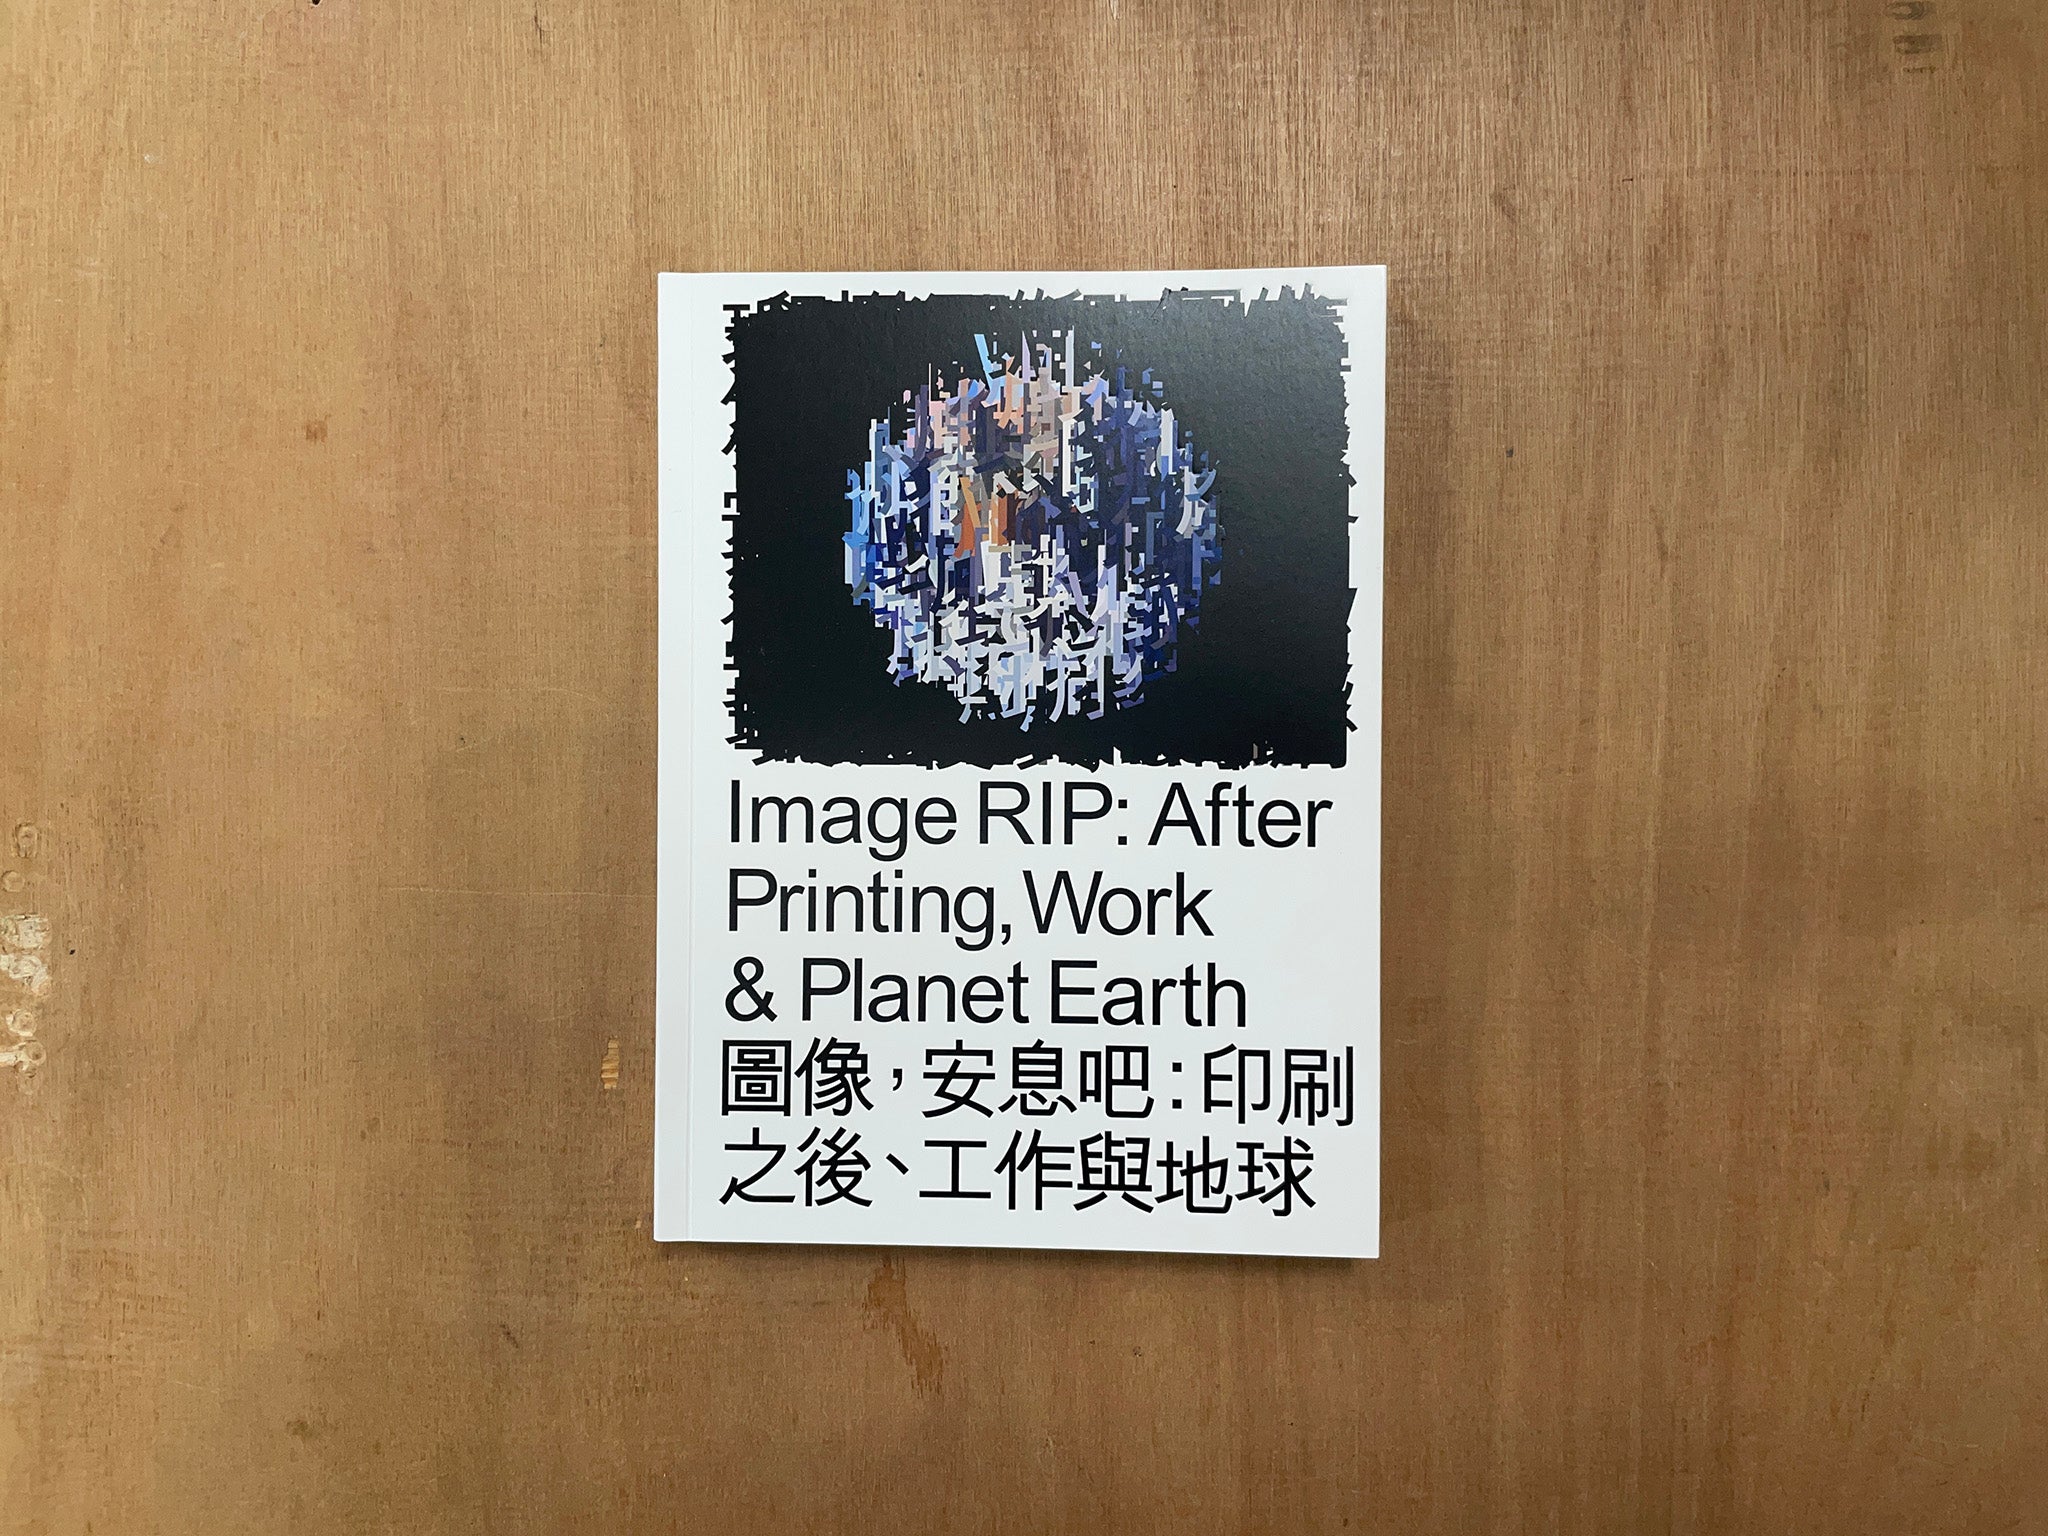 IMAGE RIP: AFTER PRINTING, WORK & PLANET EARTH by Geoff Han